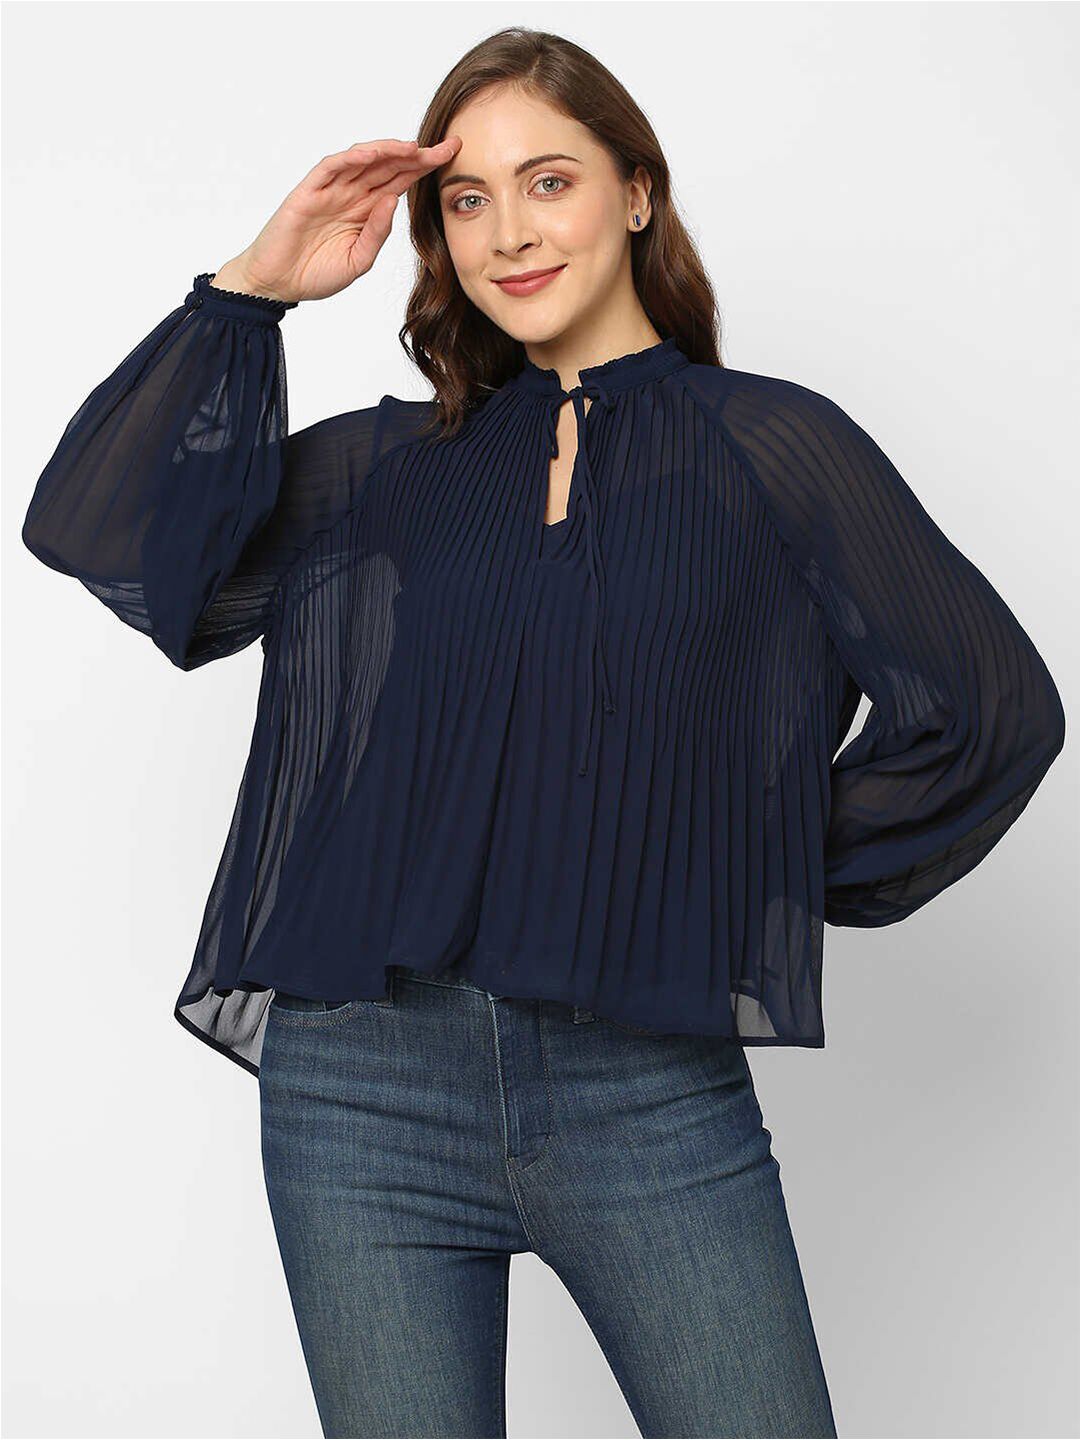 Pepe Jeans Women Navy Blue Accordian Pleated Top Price in India